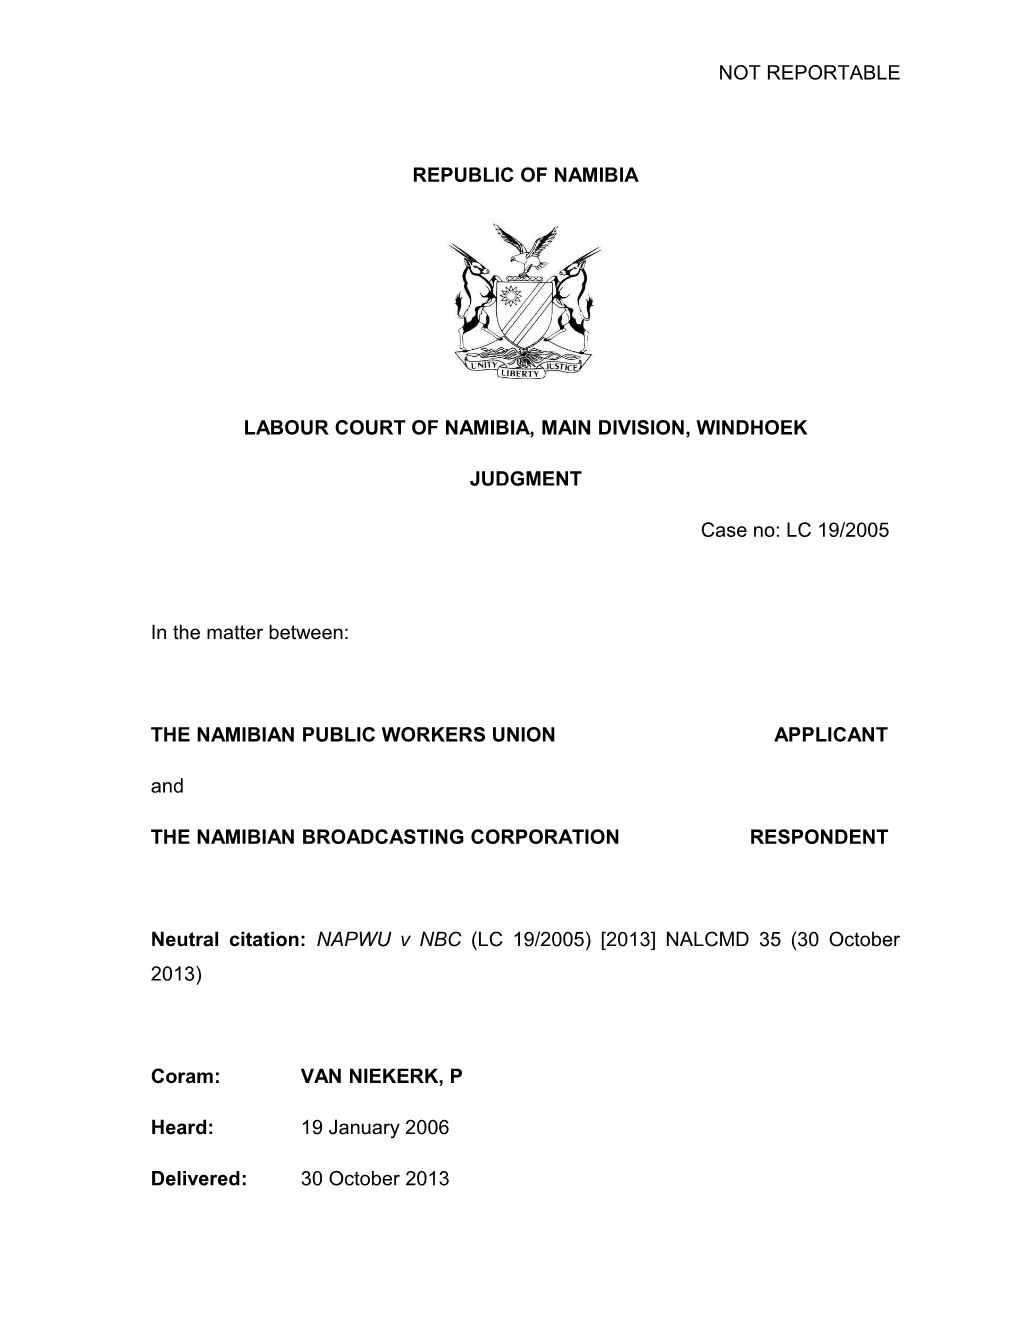 Labour Court of Namibia, Main Division, Windhoek s1